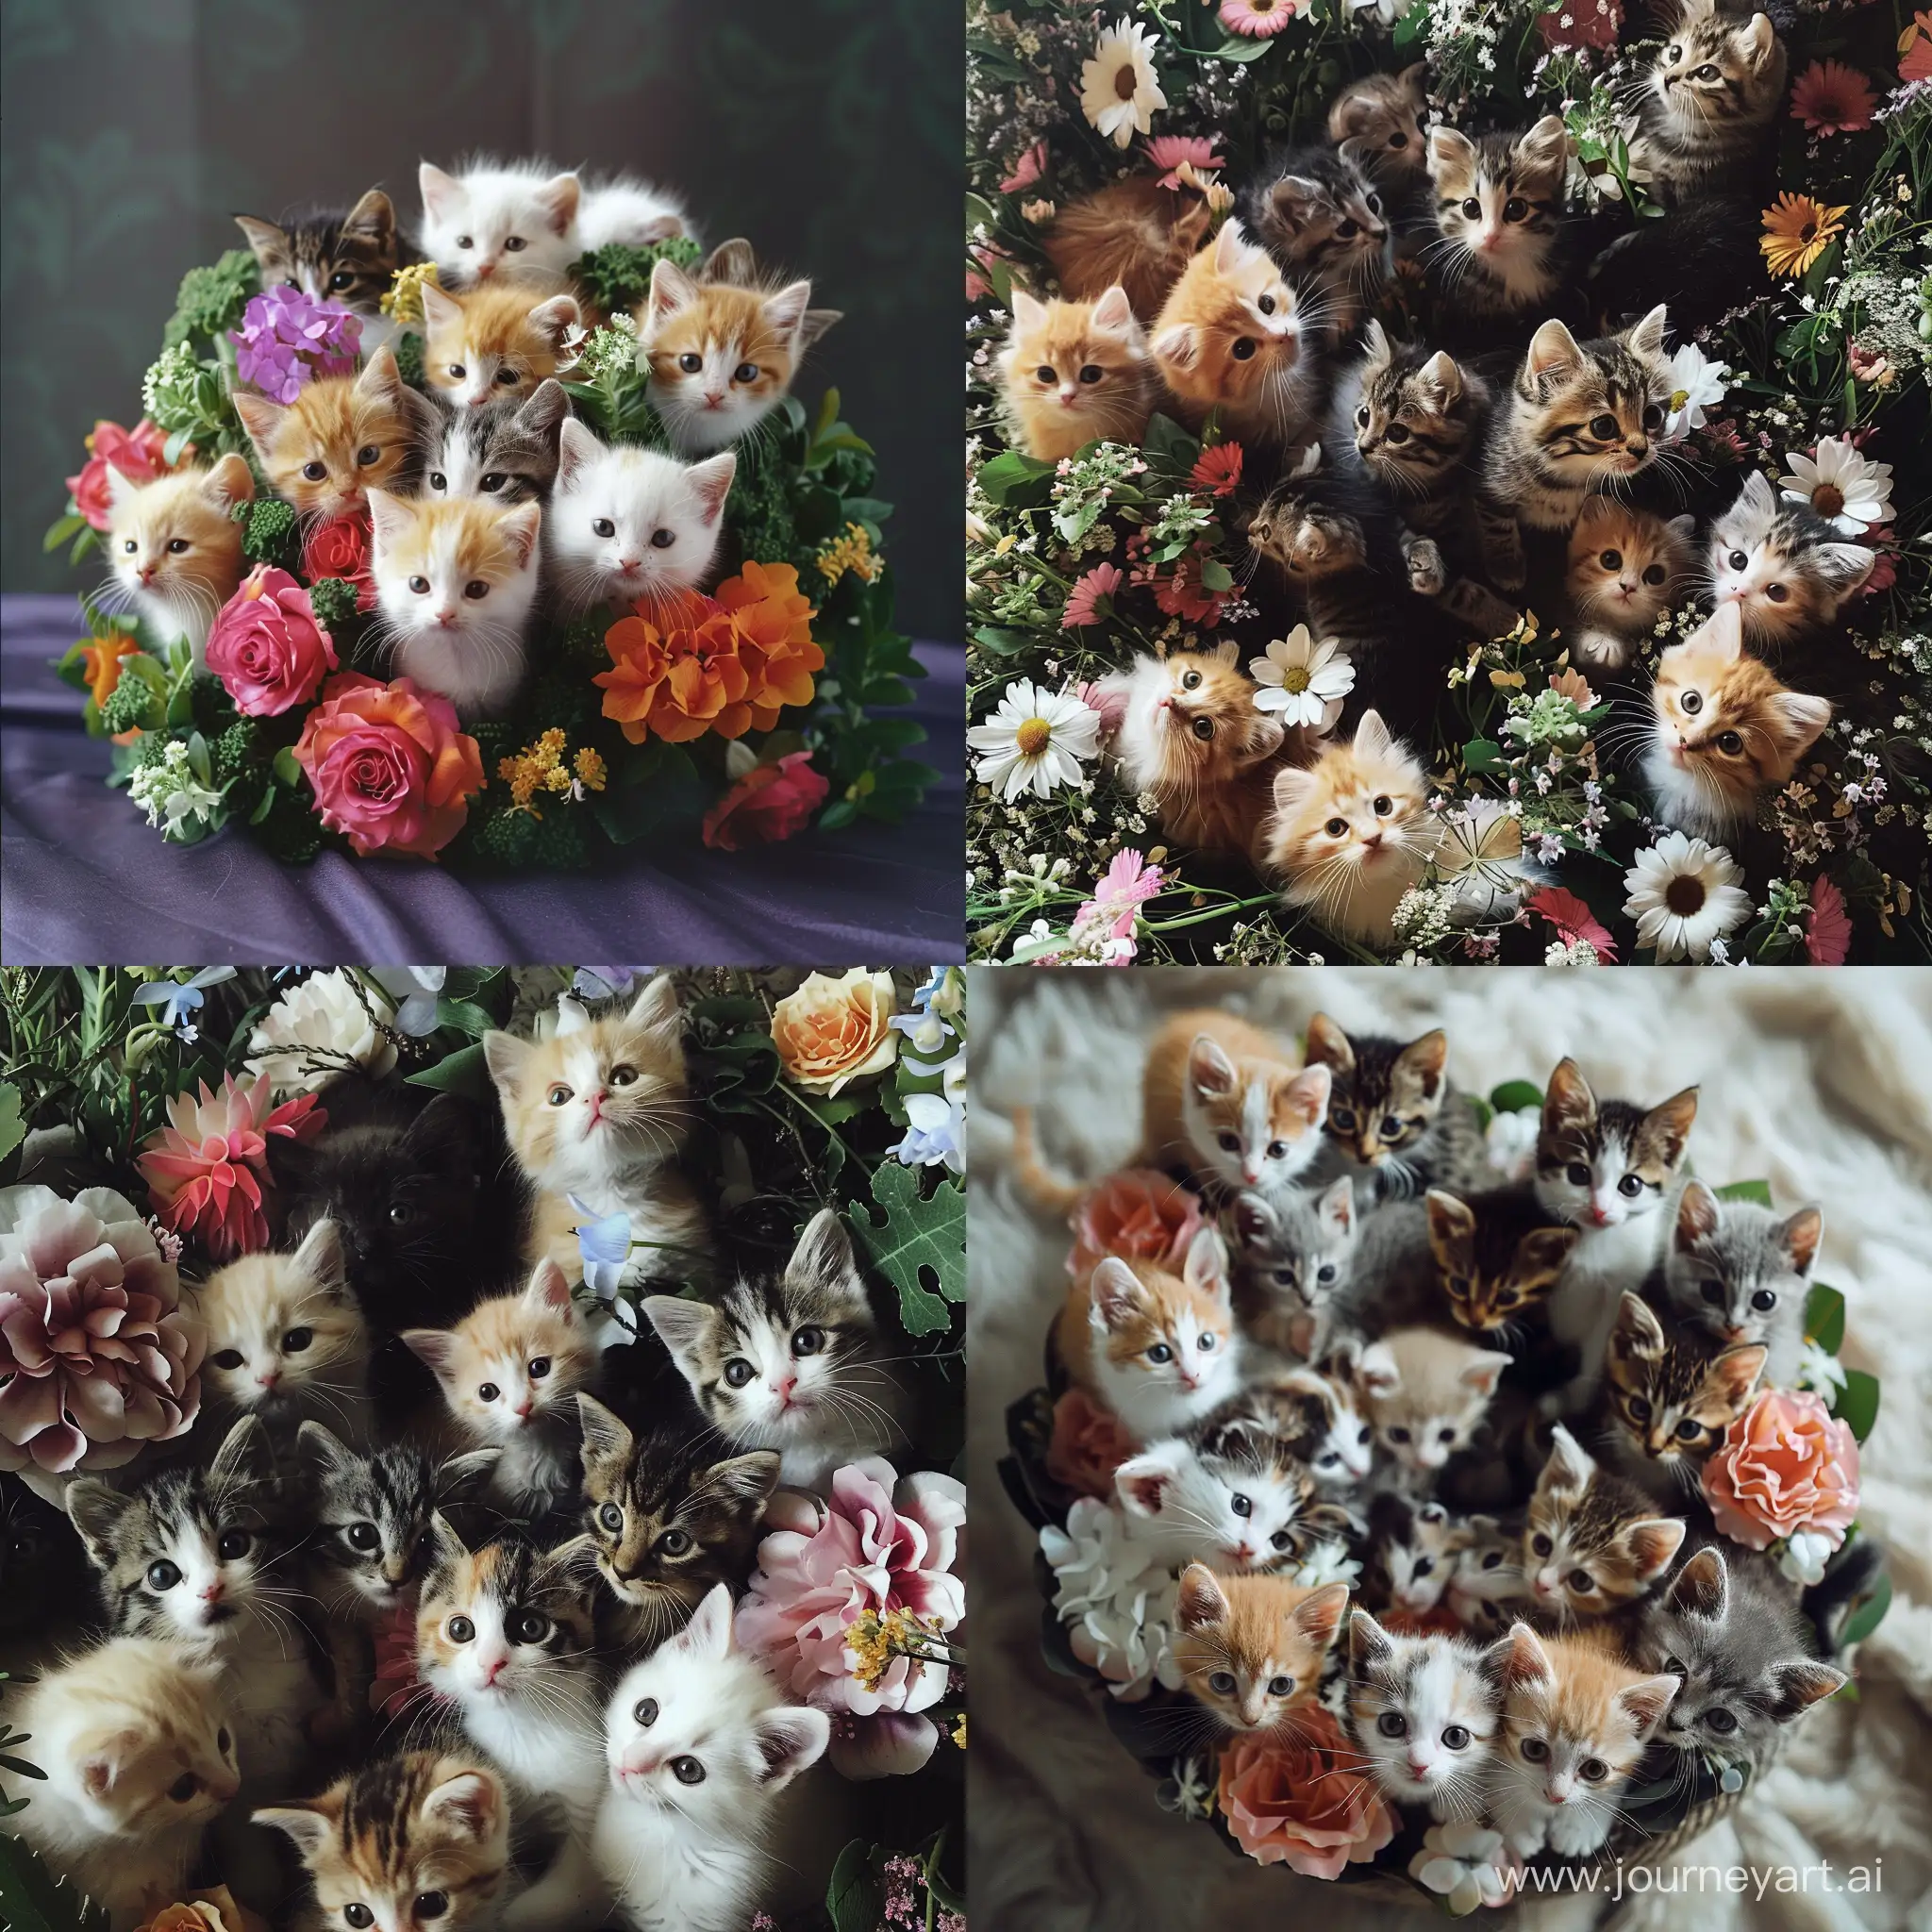 A bouquet of flowers but instead of flowers there are extremely cute and adorable kittens.